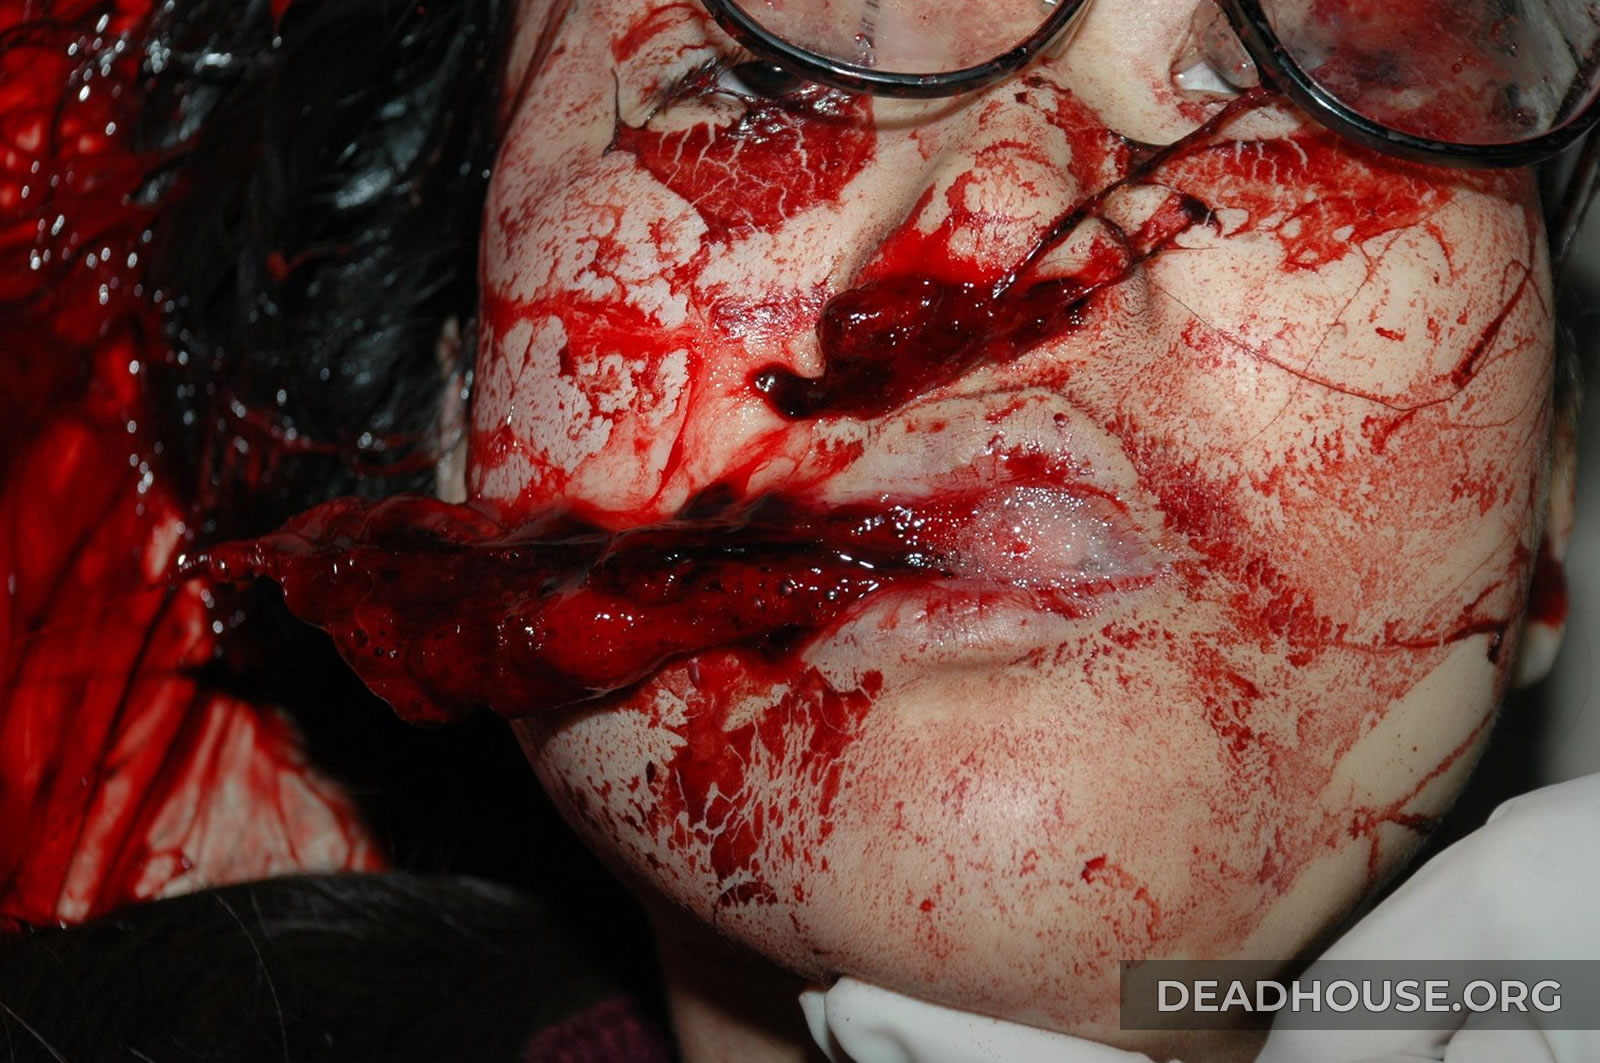 Girl's bloodied face